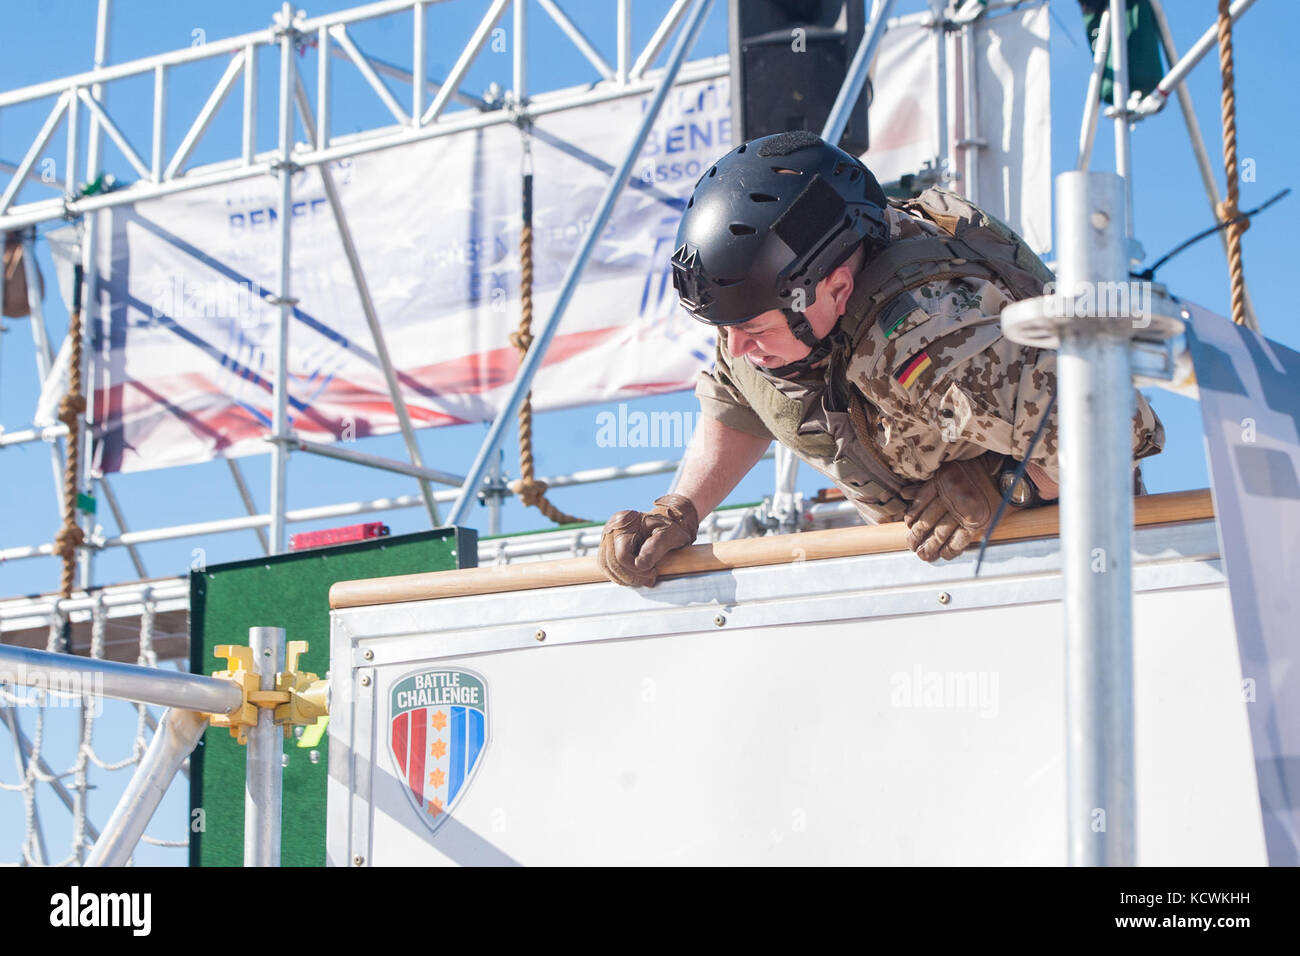 The South Carolina National Guard hosted its first “Battle Challenge” at McCrady Training Center in Eastover, South Carolina, Jan. 28-31, 2017. The Battle Challenge is a mobile obstacle course requiring participants to perform nine tasks under pressure of time, including a cargo net climb, a knotted rope descent, wall surmount, ammunition resupply, low crawl, gas can carry, marksmanship tasks, and a service member-down rescue. The event was open to all military service members, law enforcement, first responders, firefighters, protective services and their 18 and older family members. Stock Photo